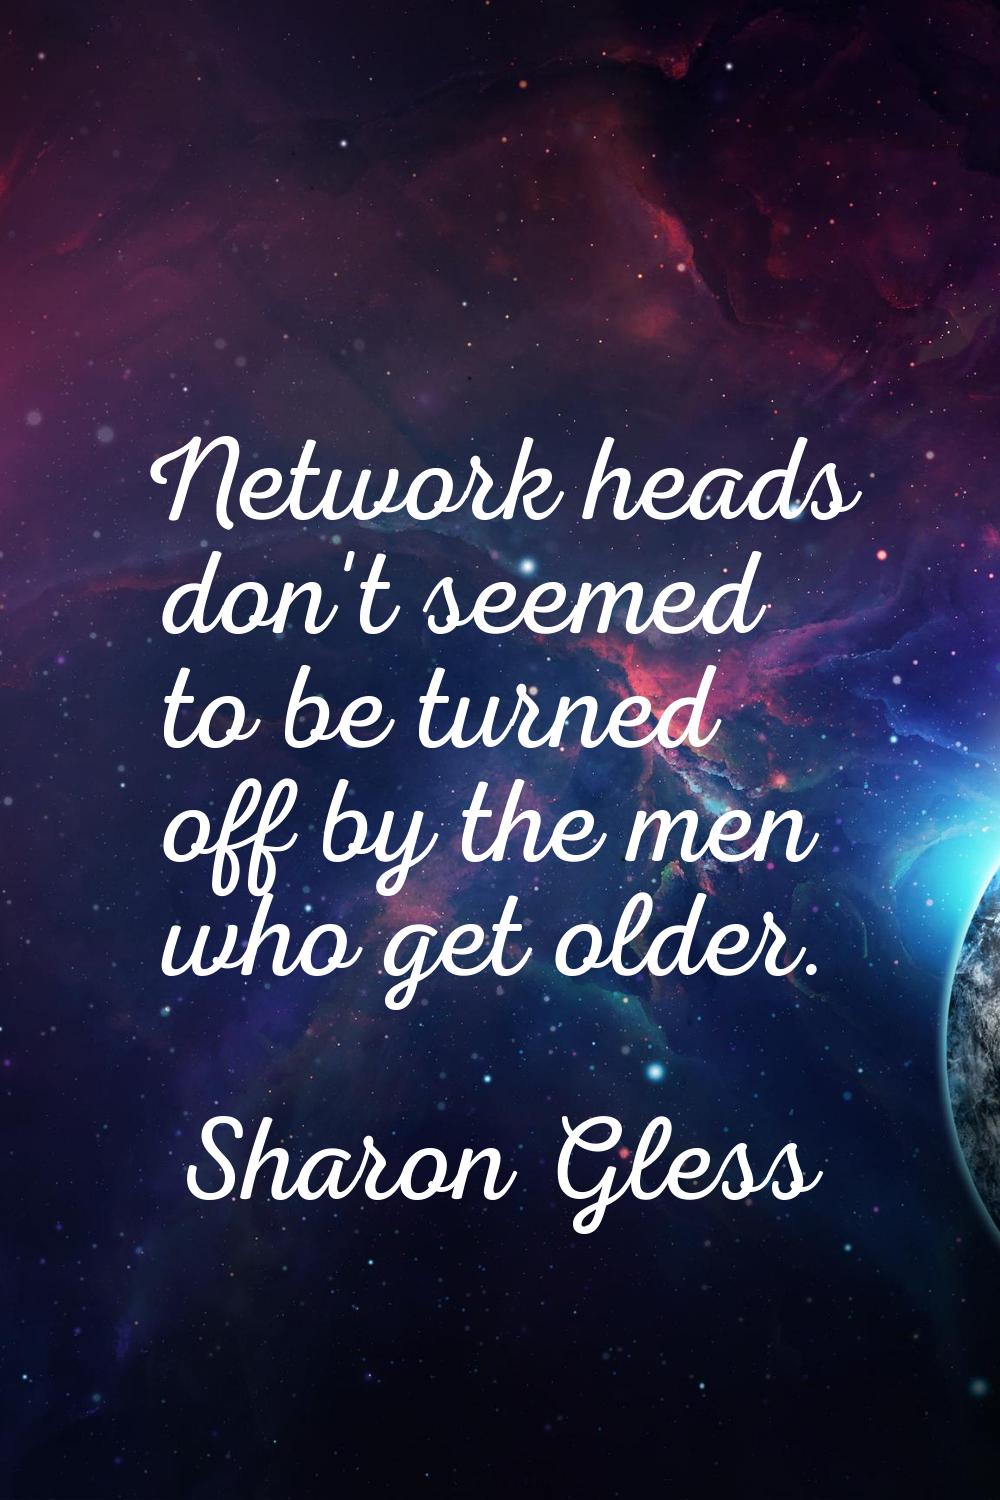 Network heads don't seemed to be turned off by the men who get older.